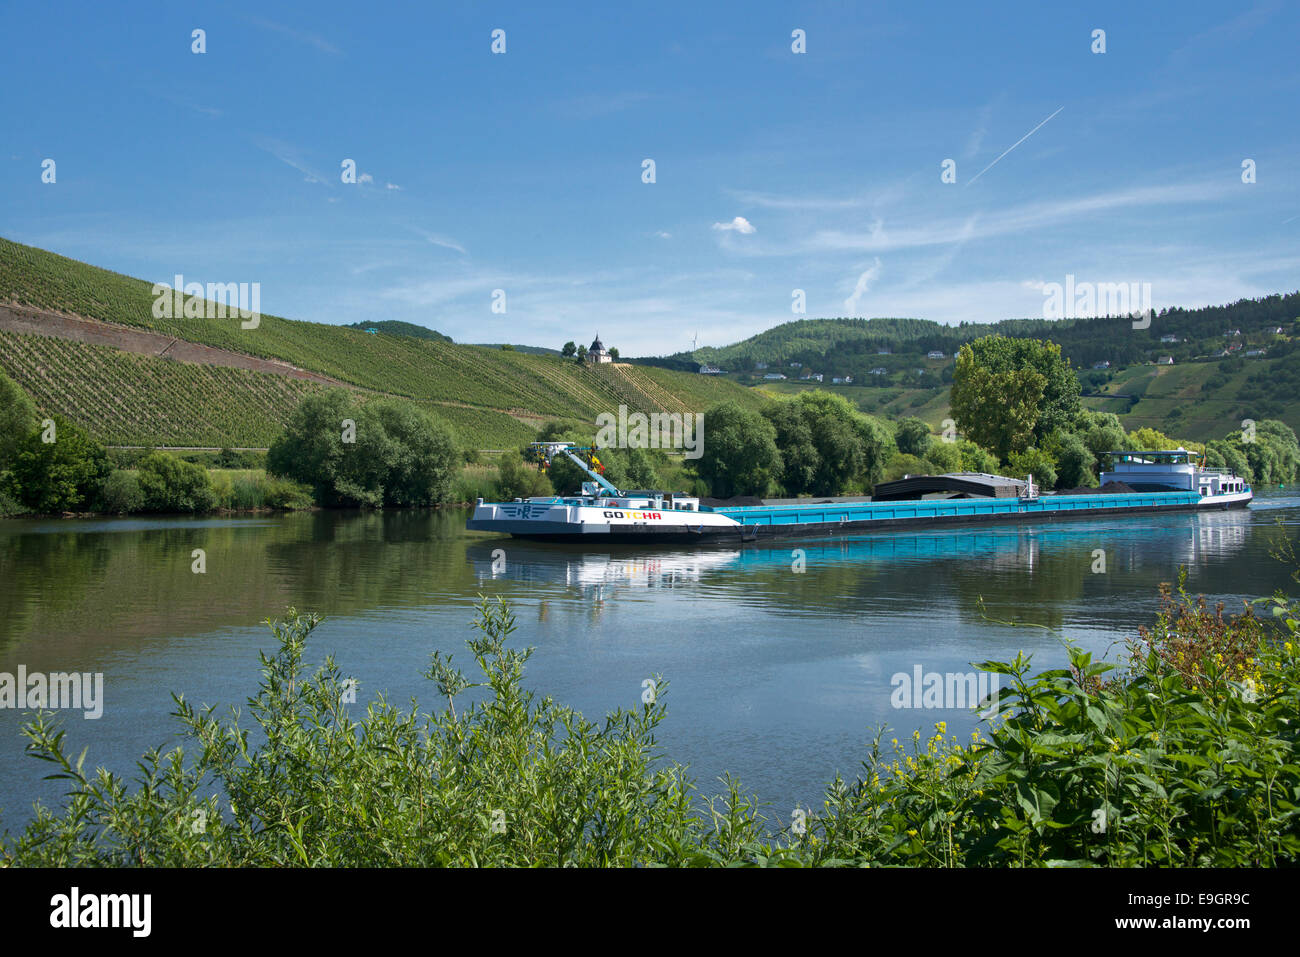 Barge on Moselle River Trittenheim Moselle Valley Germany Stock Photo